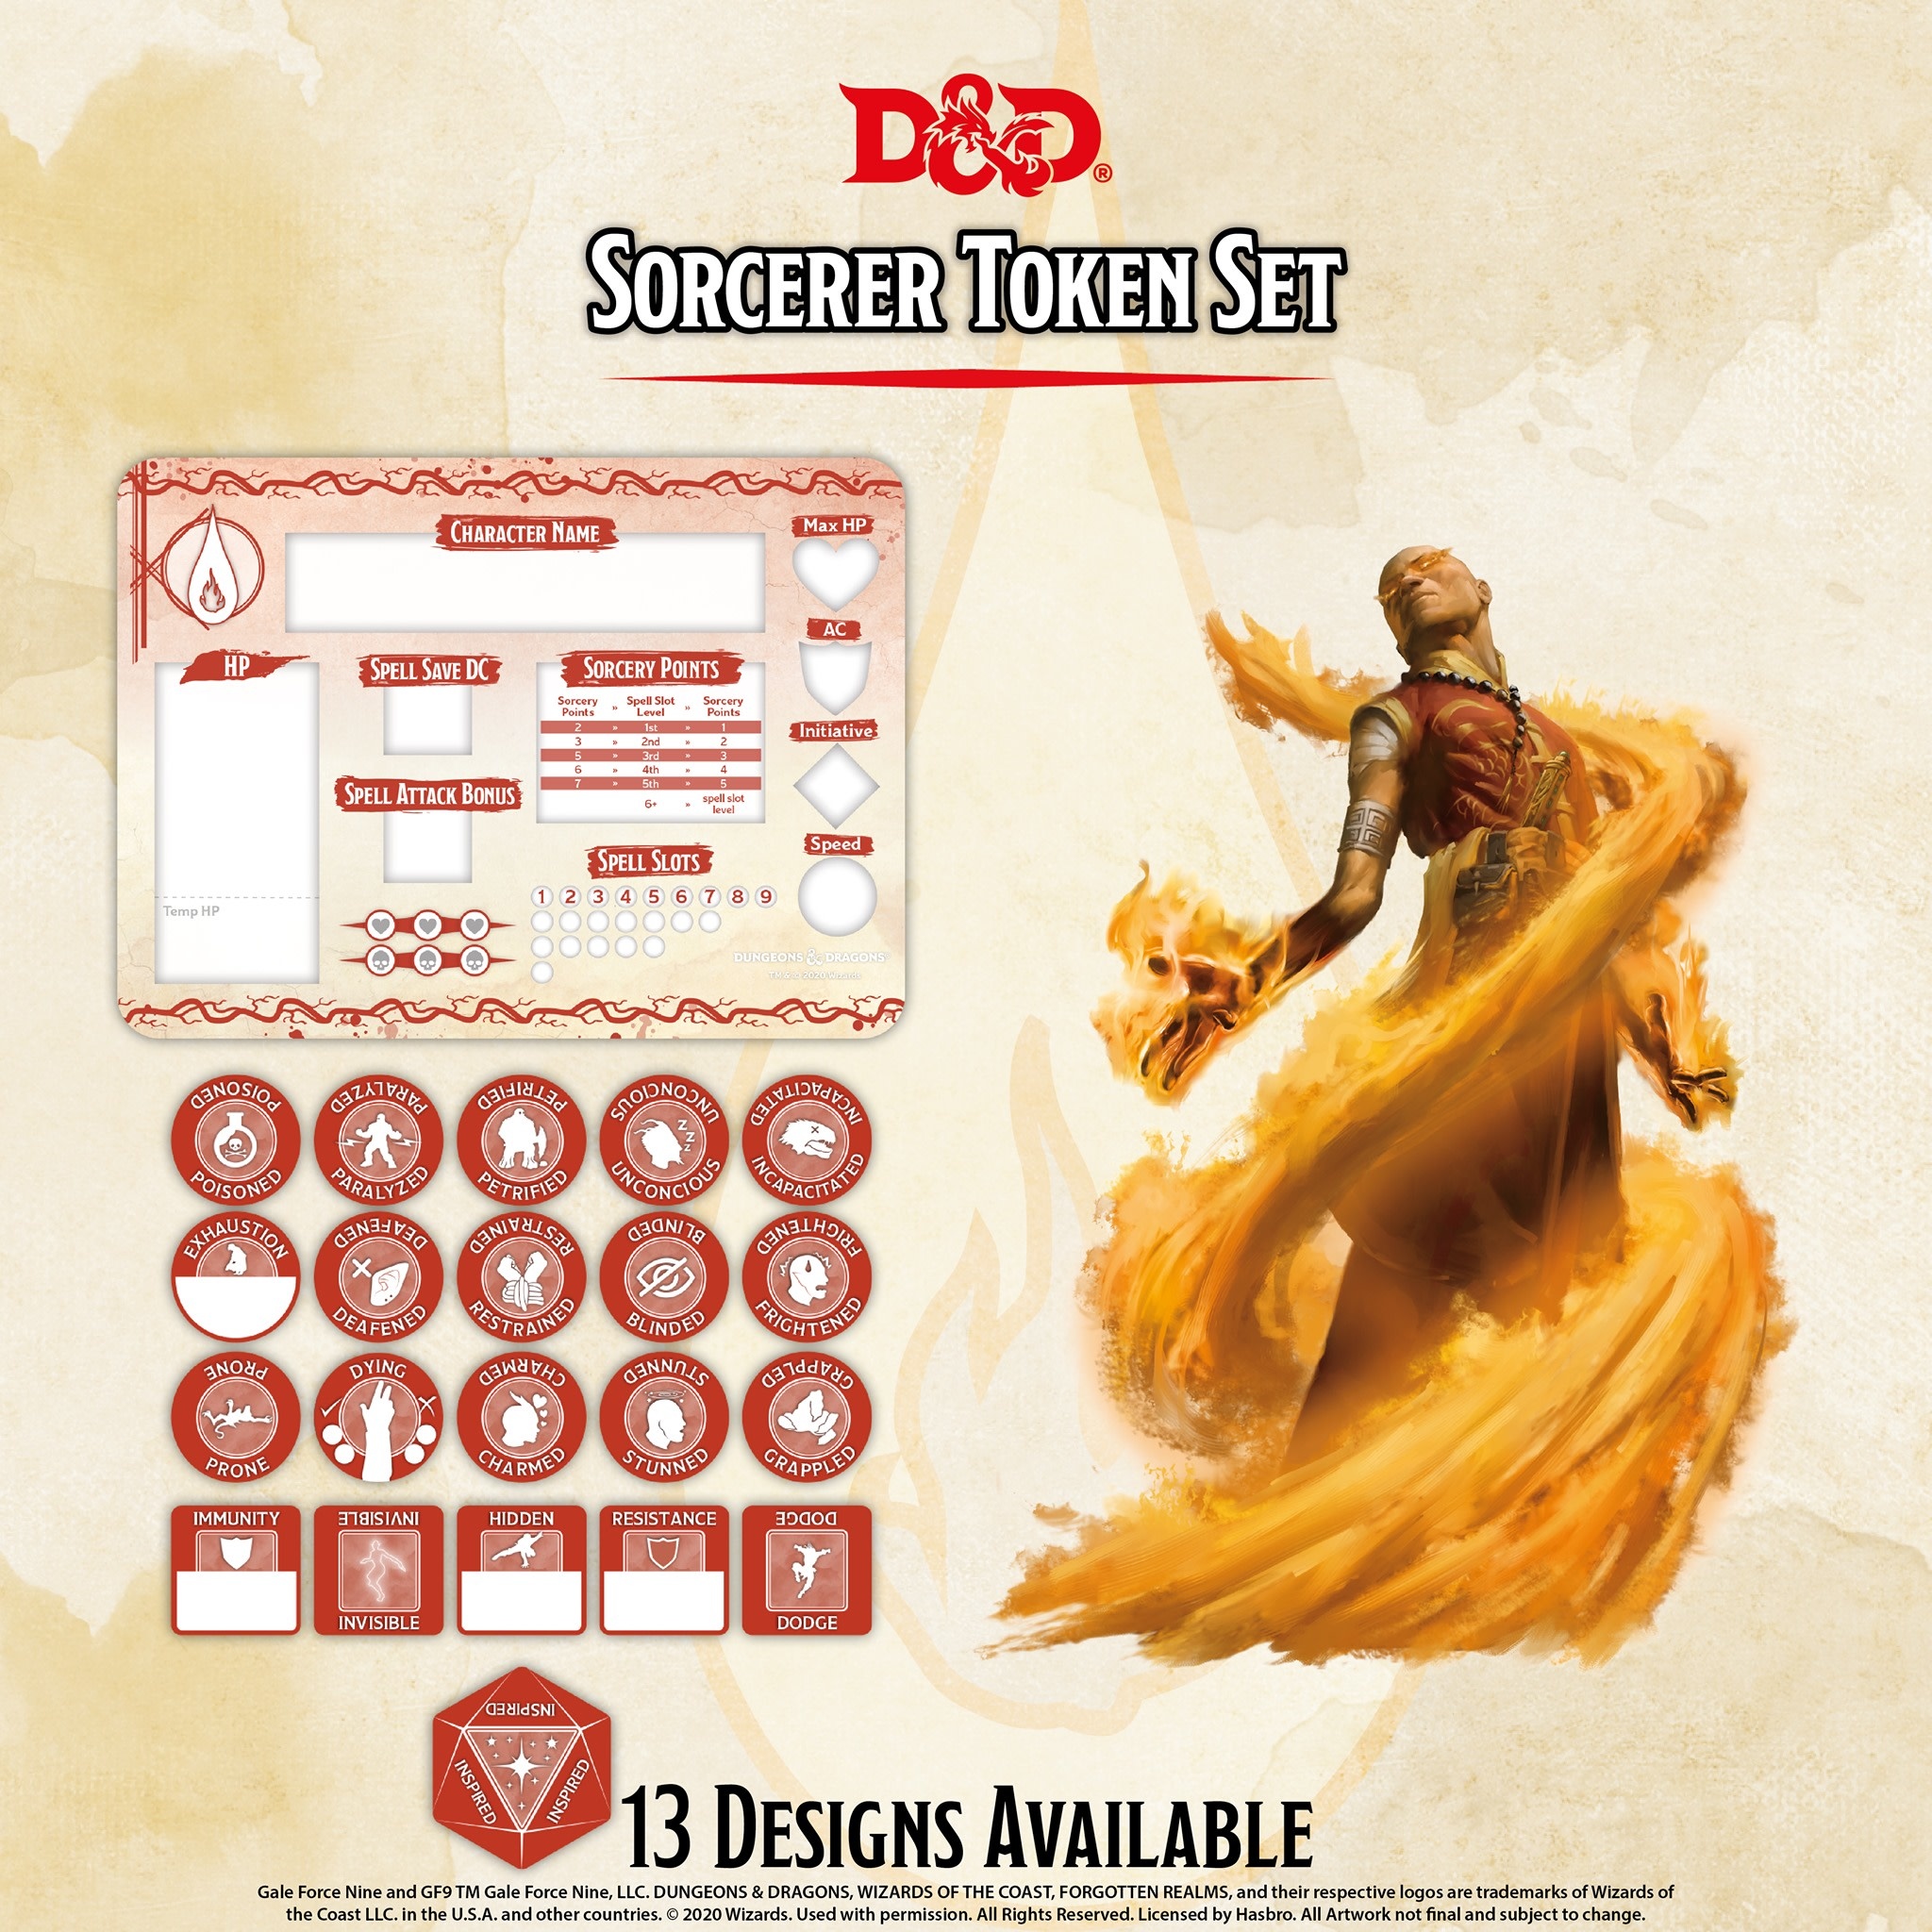 DONJEONS ET DRAGONS EXPANSION PACK ONE SCALE'S SET TOKEN SET 